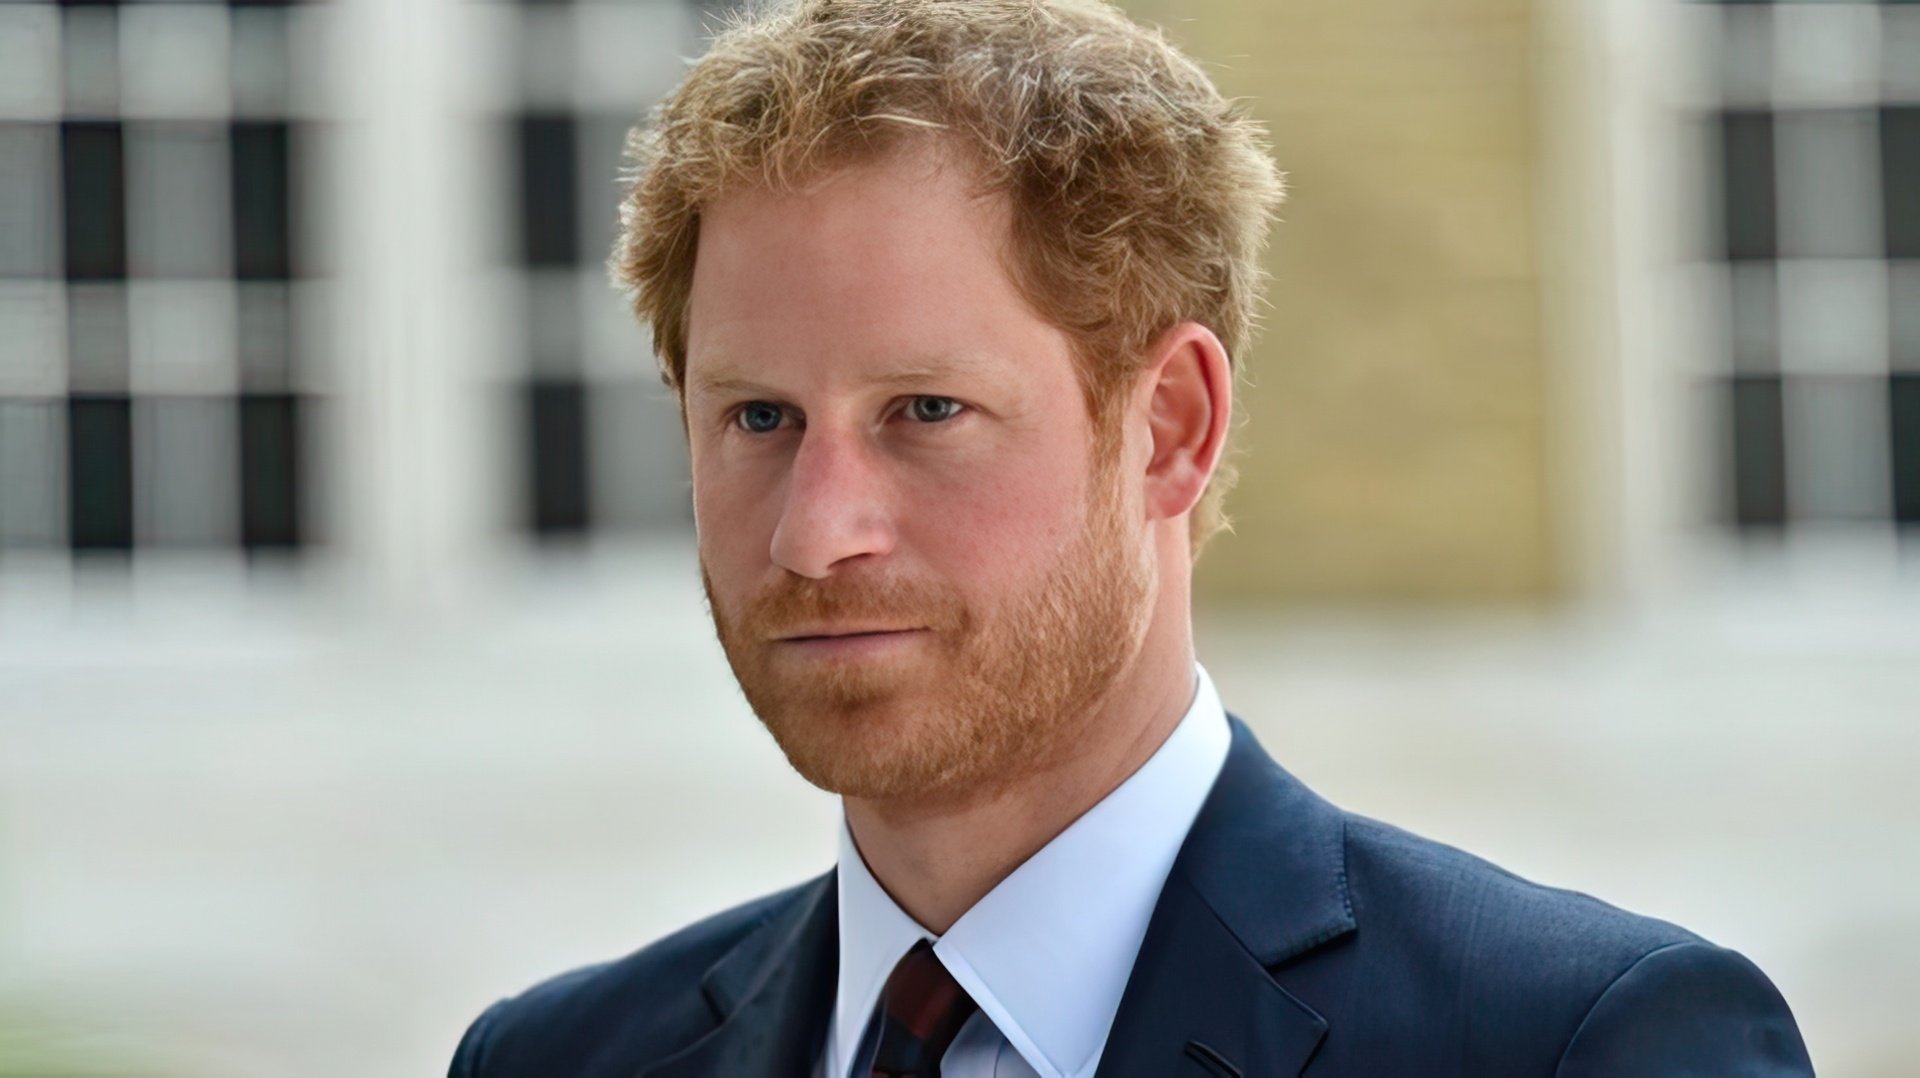 Pictured: Prince Harry